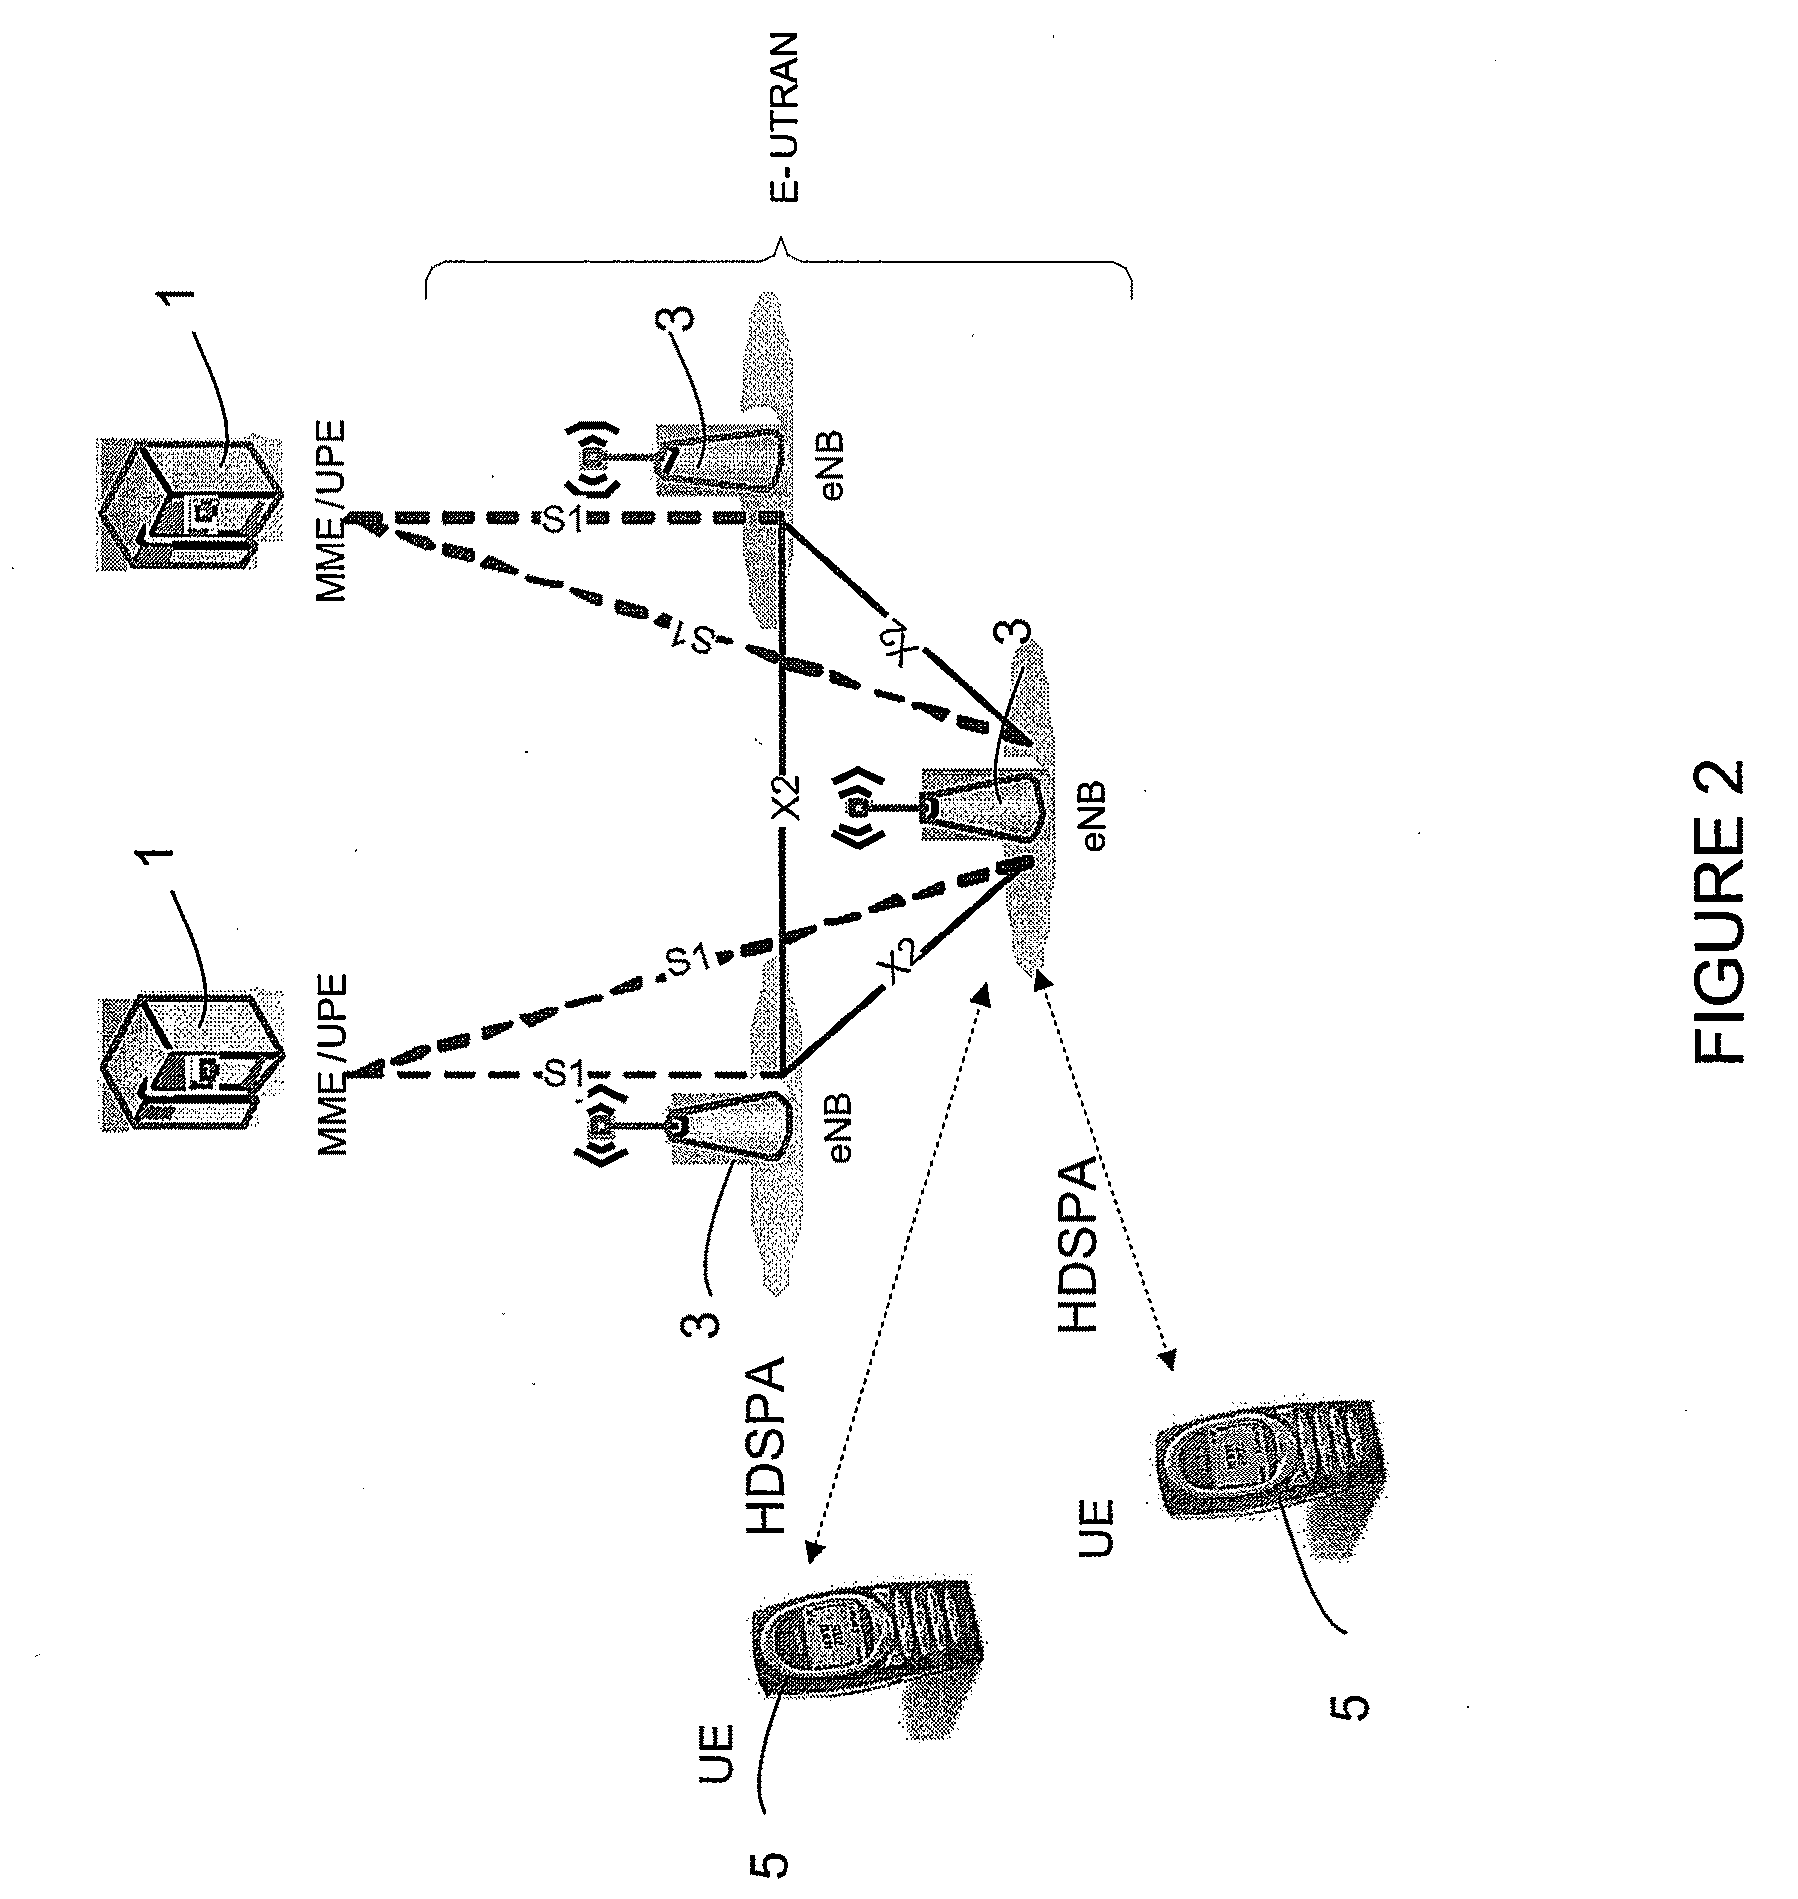 System and Methods for Generating Masking Sequences